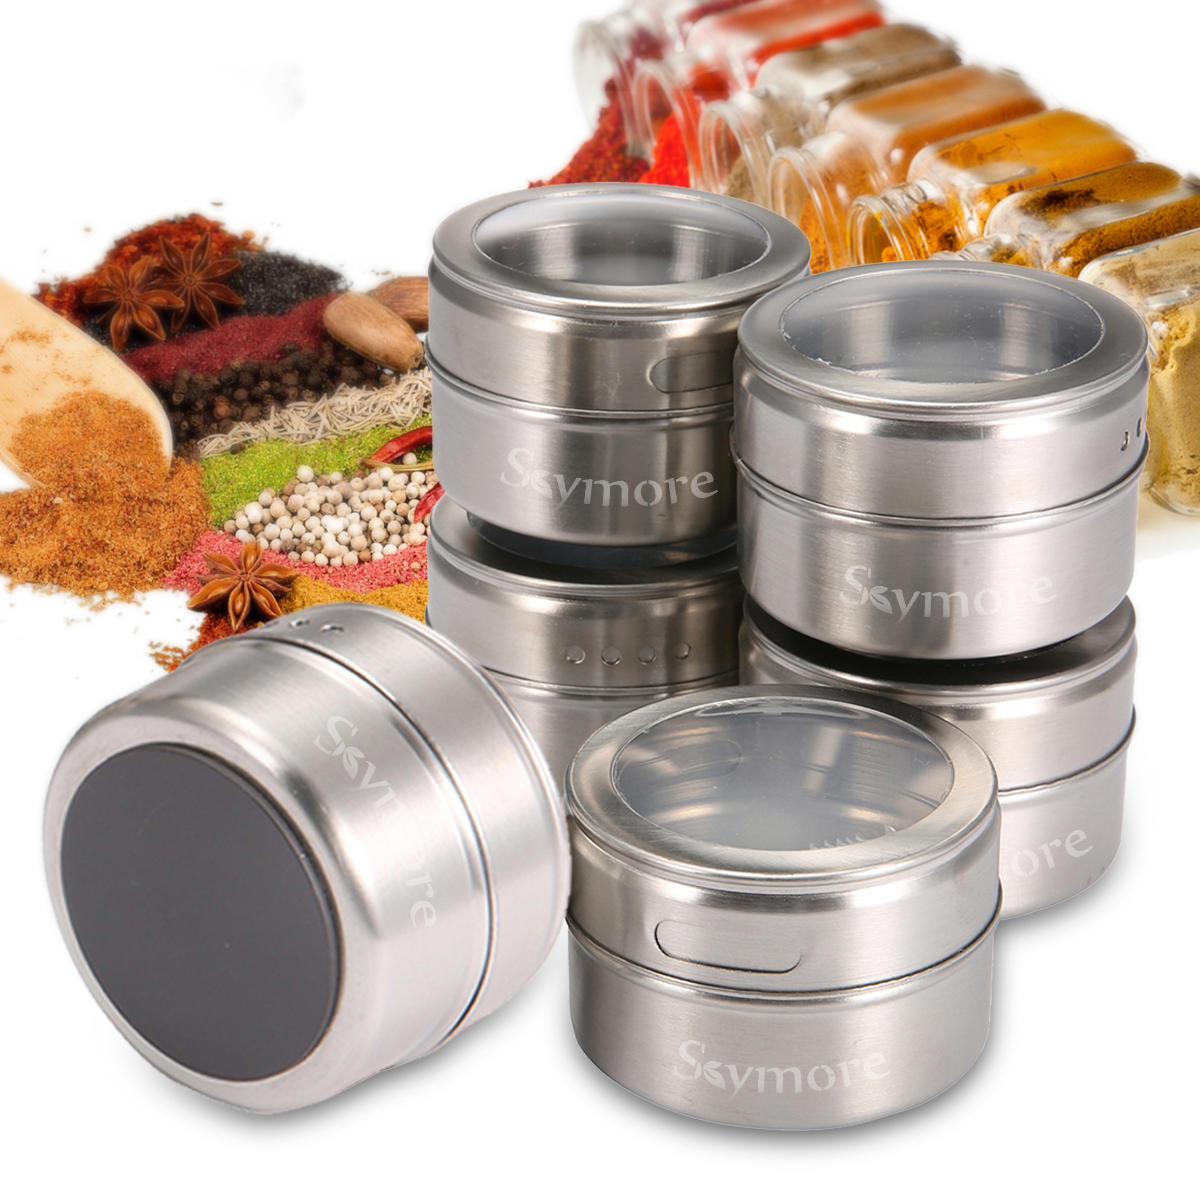 Skymore 12Pcs Spice Jar Set Stainless Steel Magnetic Spice Tins Spice Organizer Condiment Container Clear Top Lid & Sift